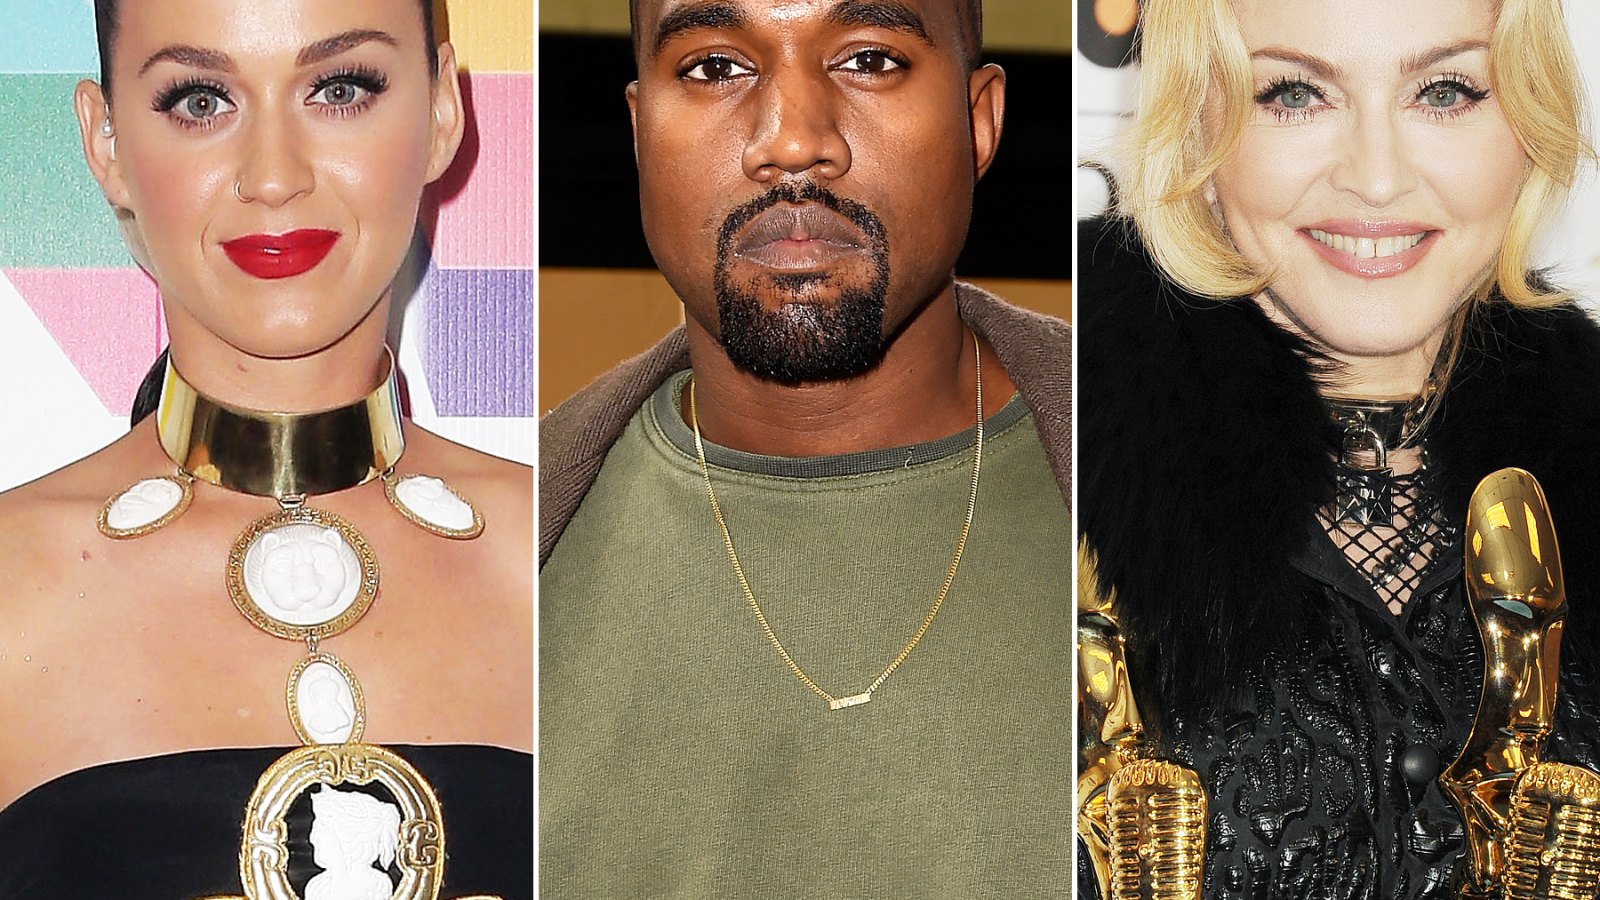 Katy Perry, Kanye West and Madonna